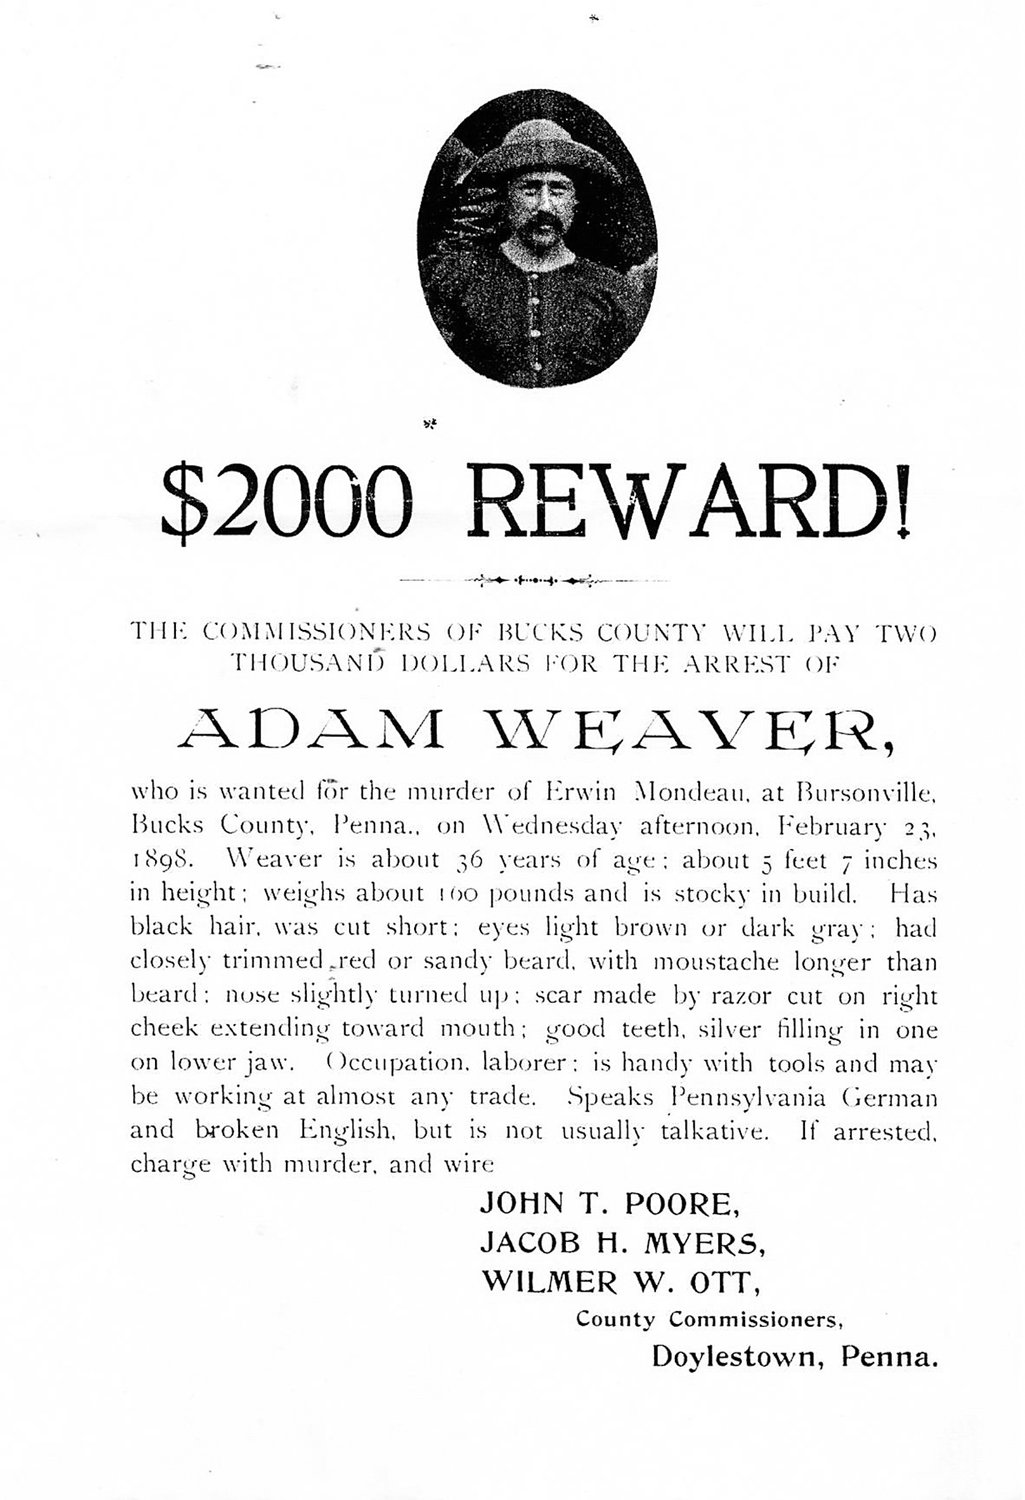 The Bucks County Commissioners offered a (then) handsome reward of $2,000 for the arrest of Adam Weaver, but he was never brought to justice for taking the life of the first law enforcement officer in Bucks County killed in the line of duty.